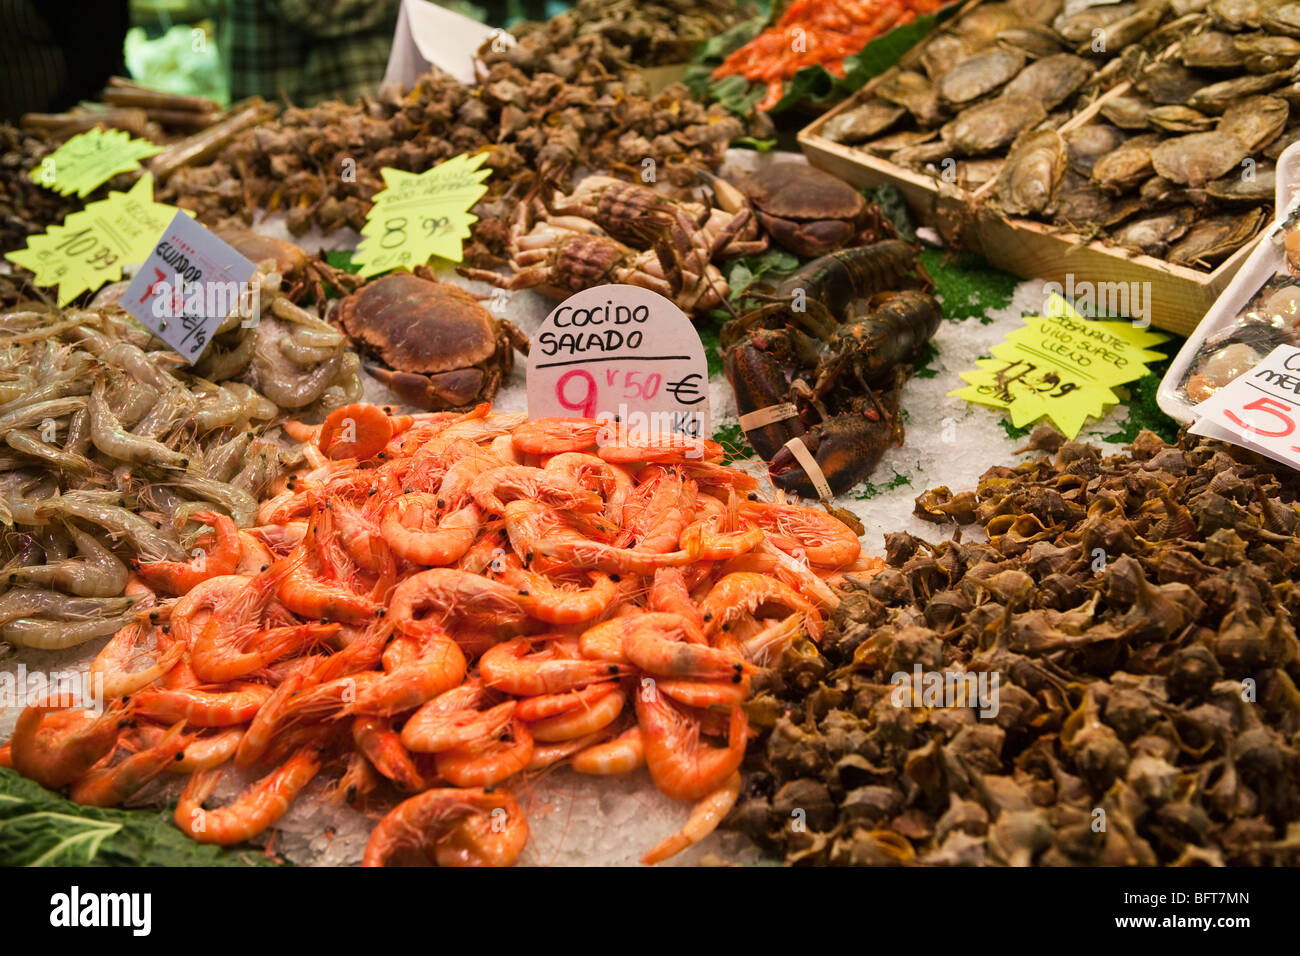 Seafood in Open Air Market, Barcelona, Spain Stock Photo